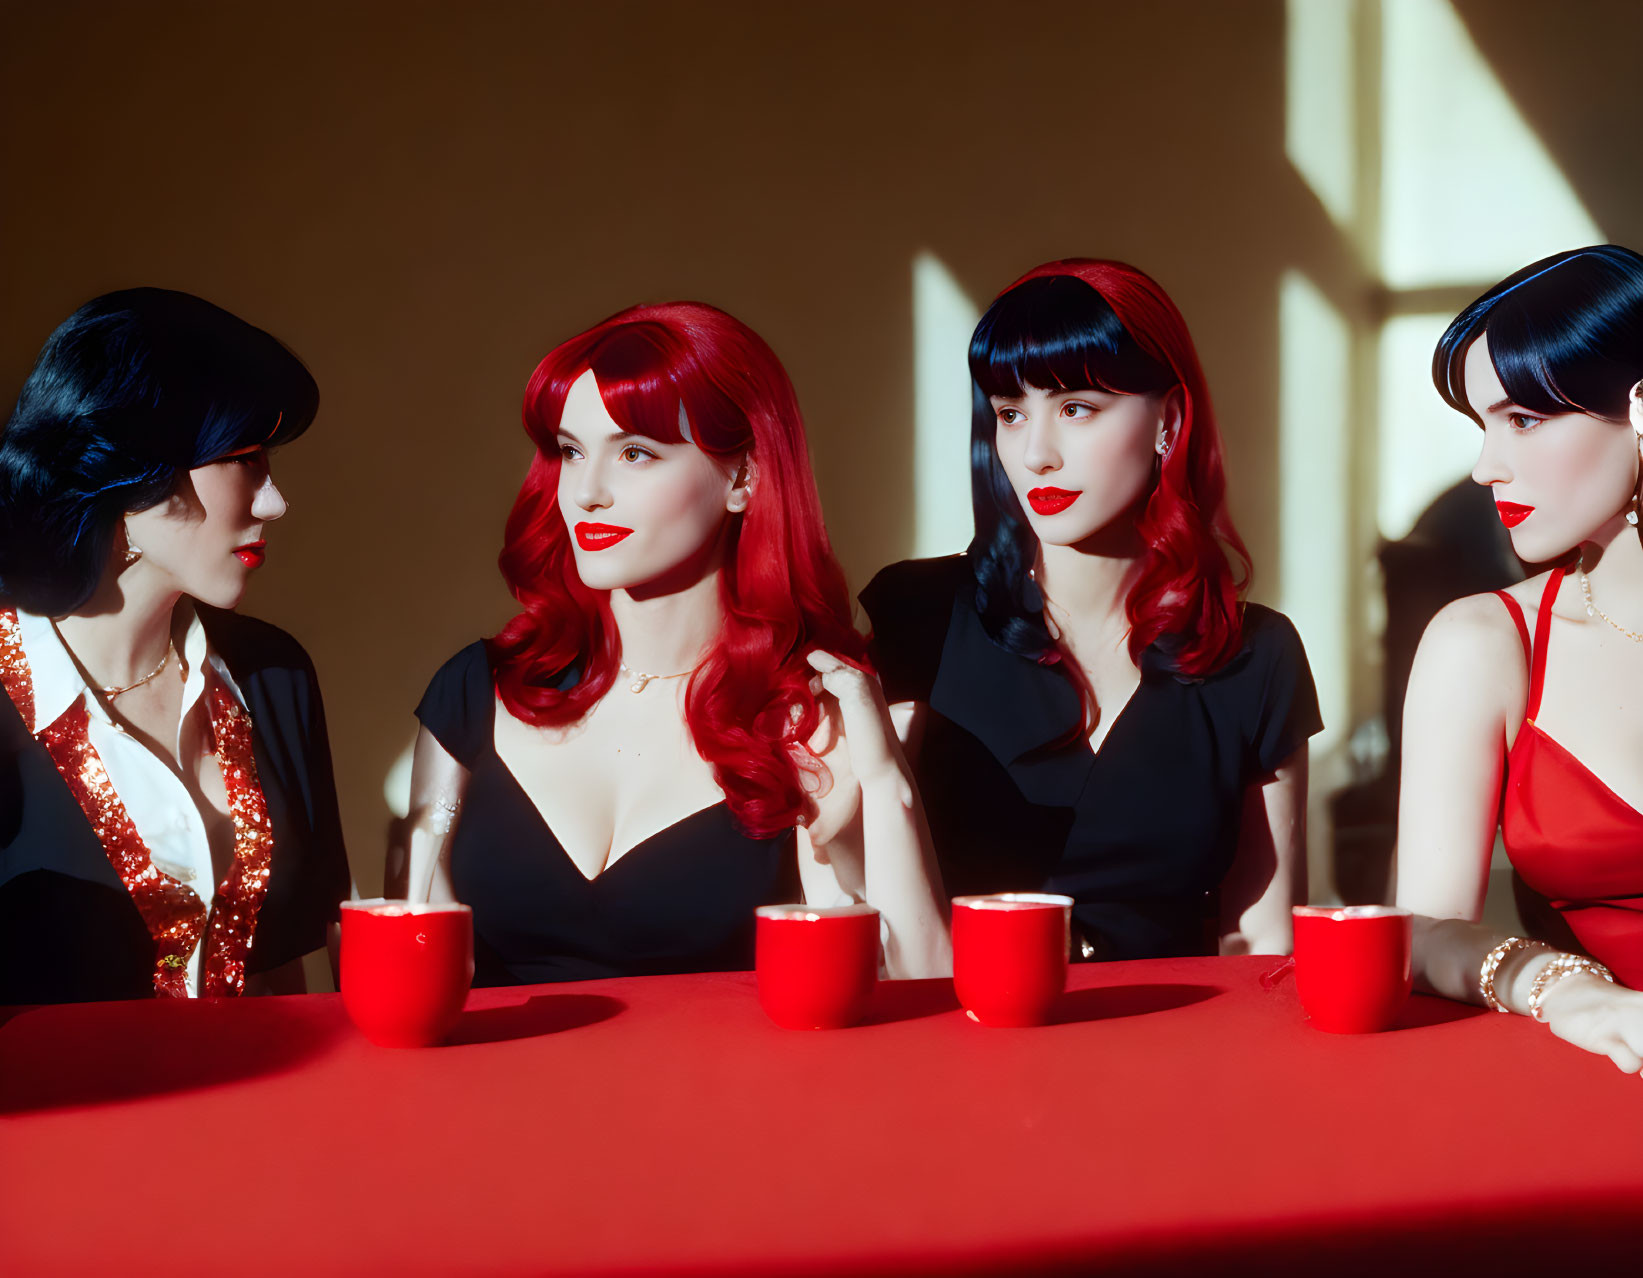 Four Women with Red and Black Hairstyles at Table with Red Cups